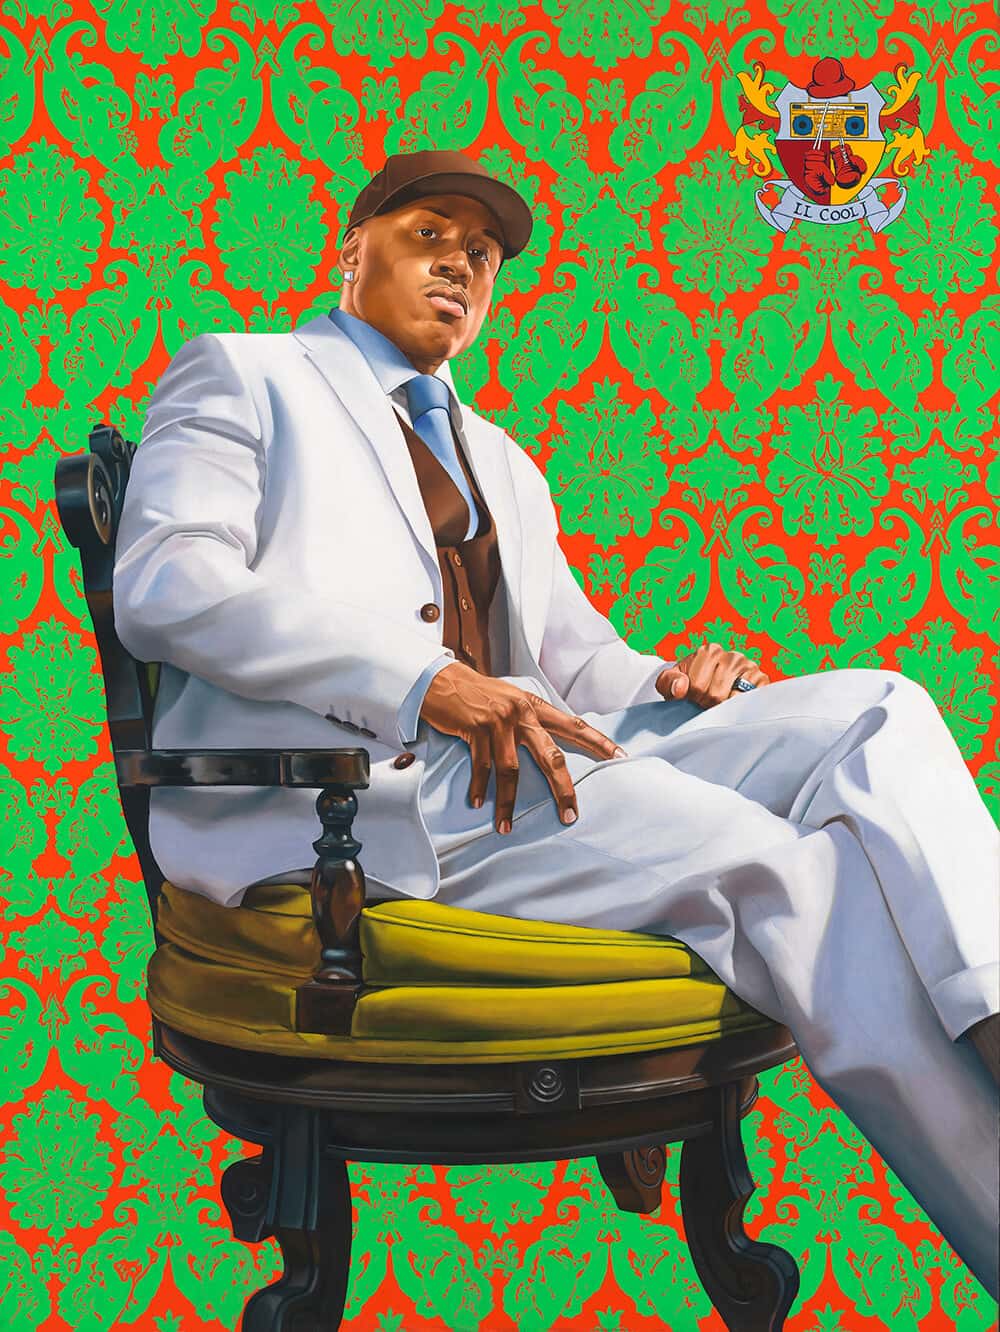 LL Cool J by Kehinde Wiley, oil on canvas, 2005. National Portrait Gallery, Smithsonian Institution; on loan from LL Cool J © Kehinde Wiley. Courtesy of Smithsonian National Portrait Gallery.